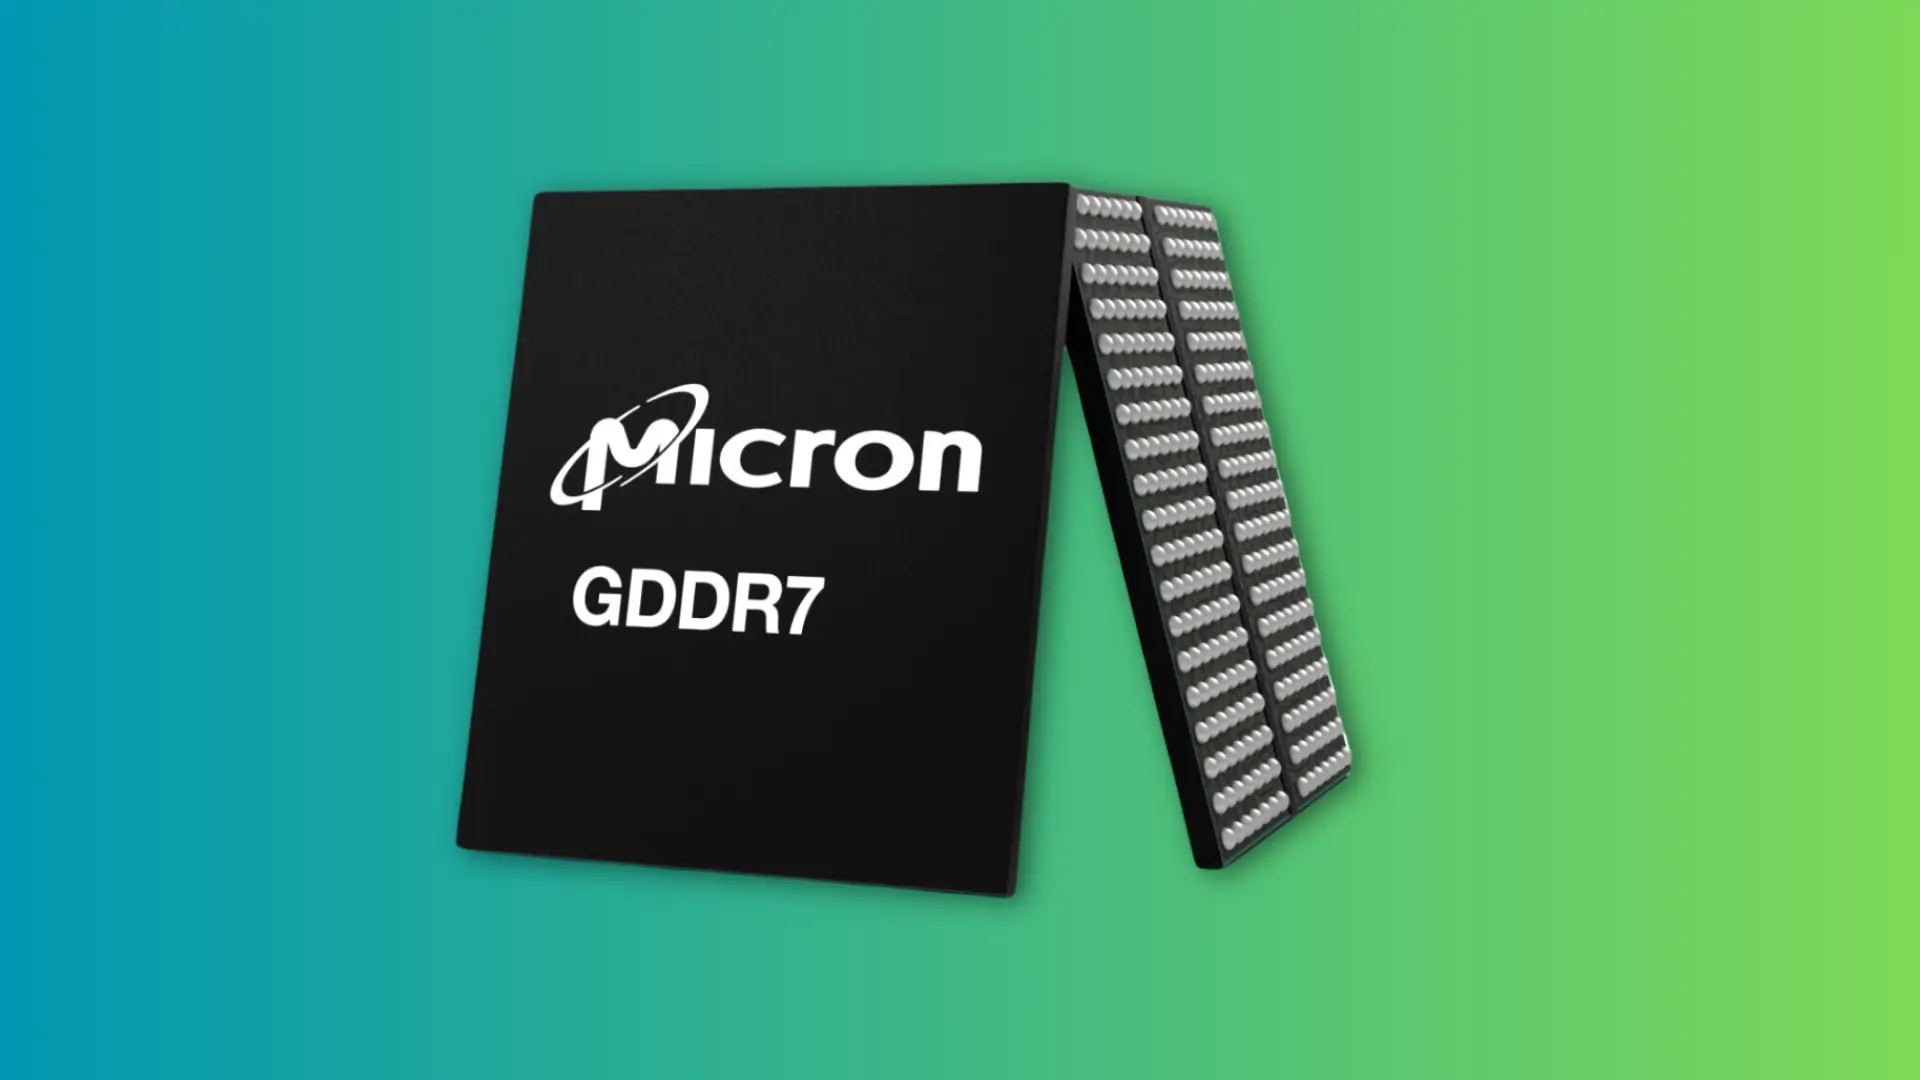 Micron GDDR7 Memory is Official; Offers up to 1.5TB/s Bandwidth and 30% Performance Improvement in Games